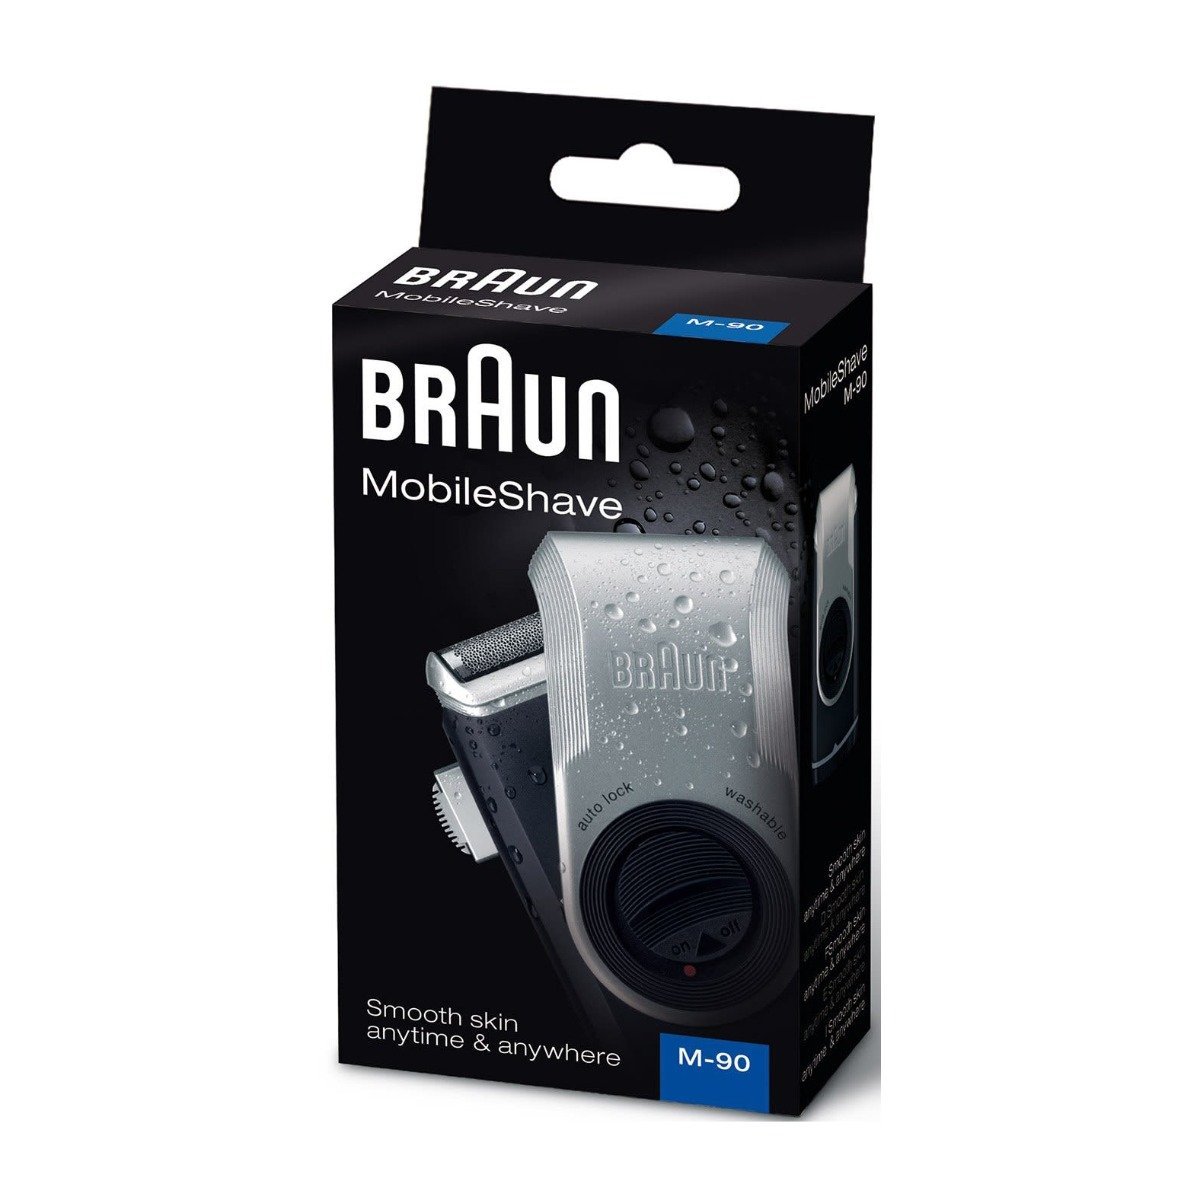 Braun Mobile shave Shave - M90 - Bloom Pharmacy